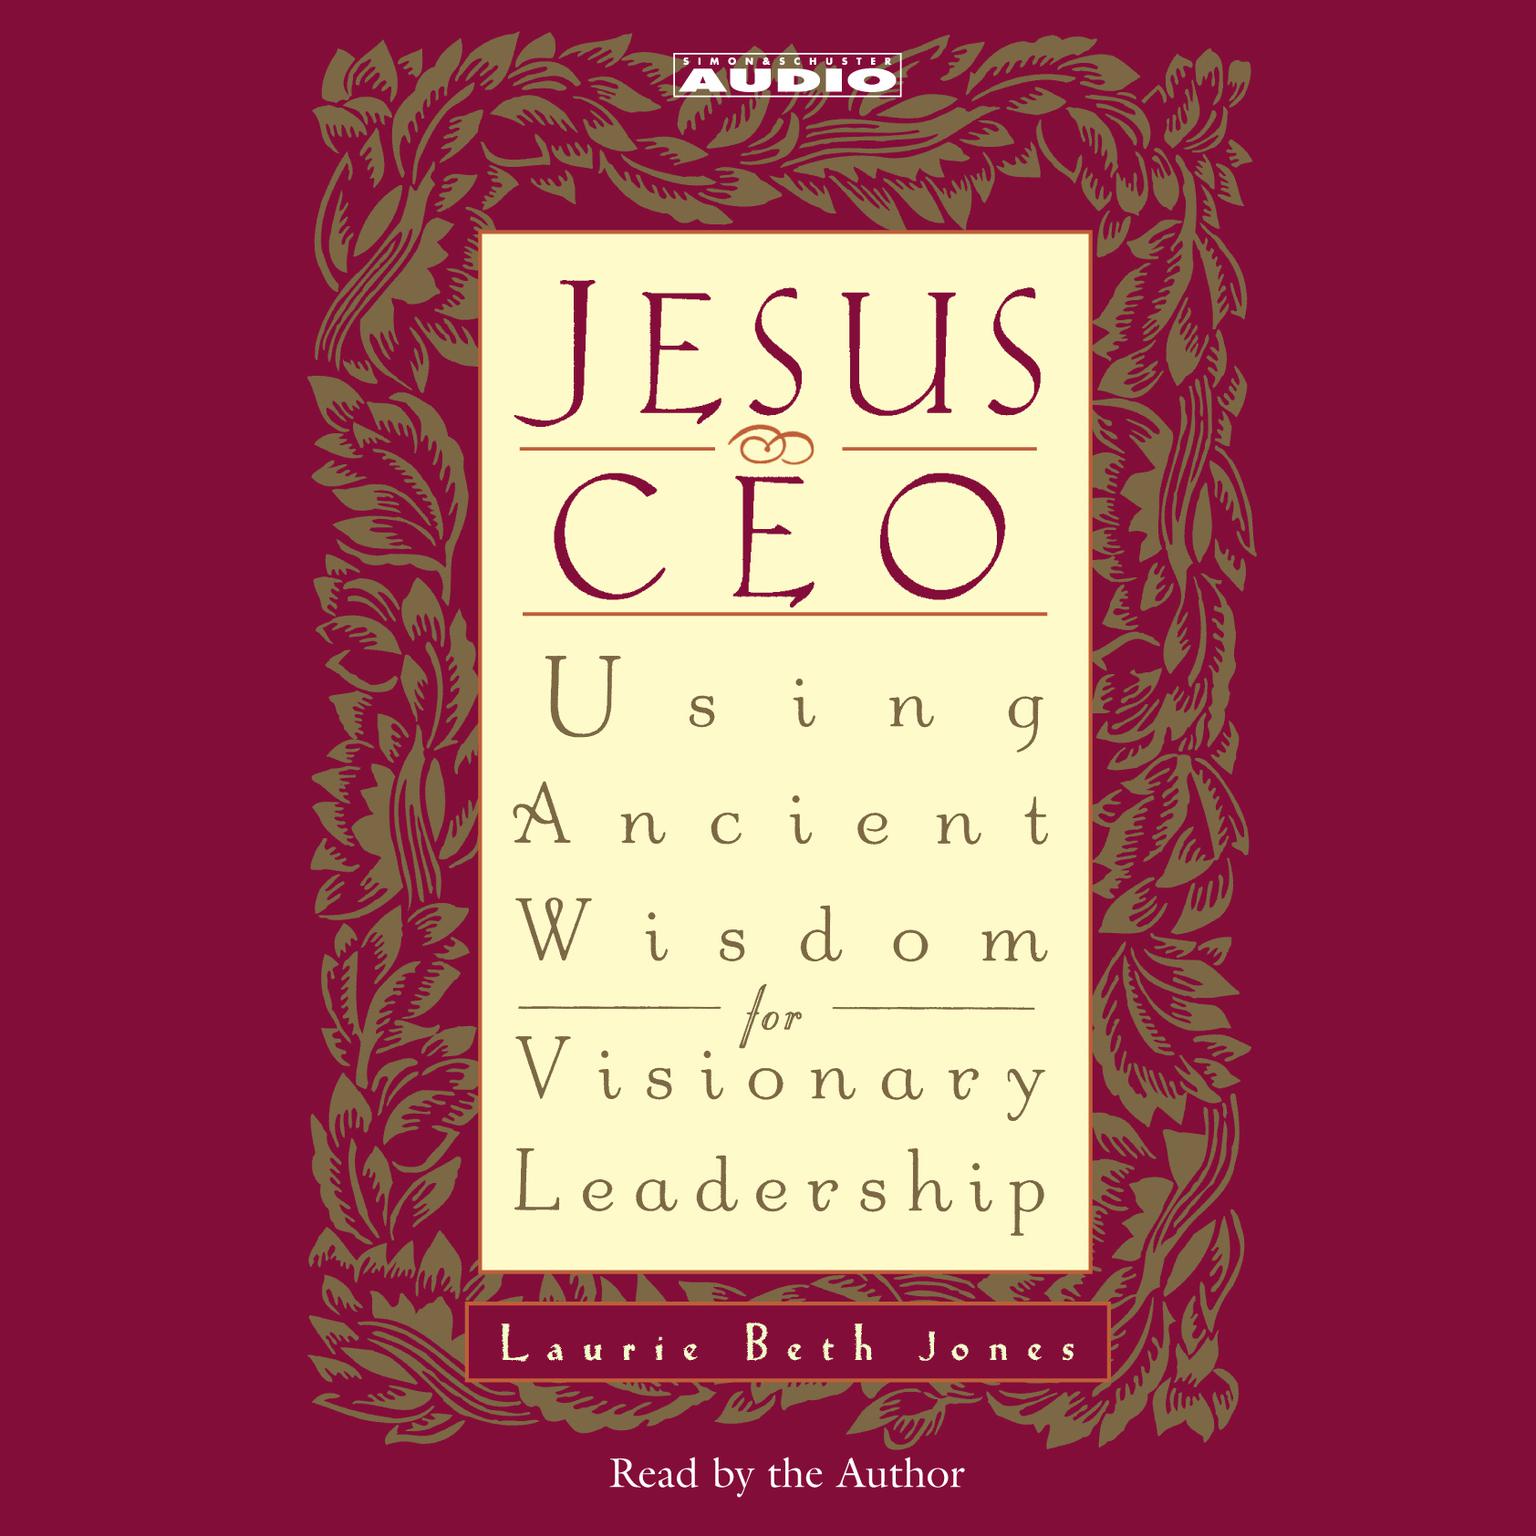 Jesus CEO (Abridged): Using Ancient Wisdom for Visionary Leadership Audiobook, by Laurie Beth Jones